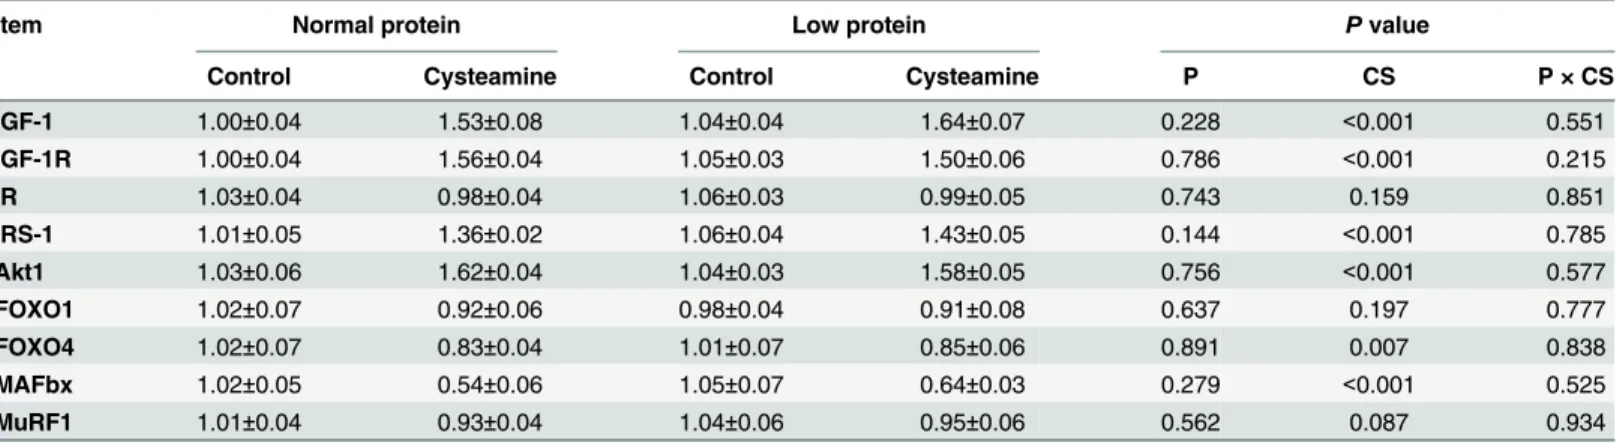 Table 5. Effects of dietary crude protein levels and cysteamine (CS) supplementation on mRNA abundance of IGF-1 (insulin)/Akt/FOXO signaling and their target genes in skeletal muscle of finishing pigs.